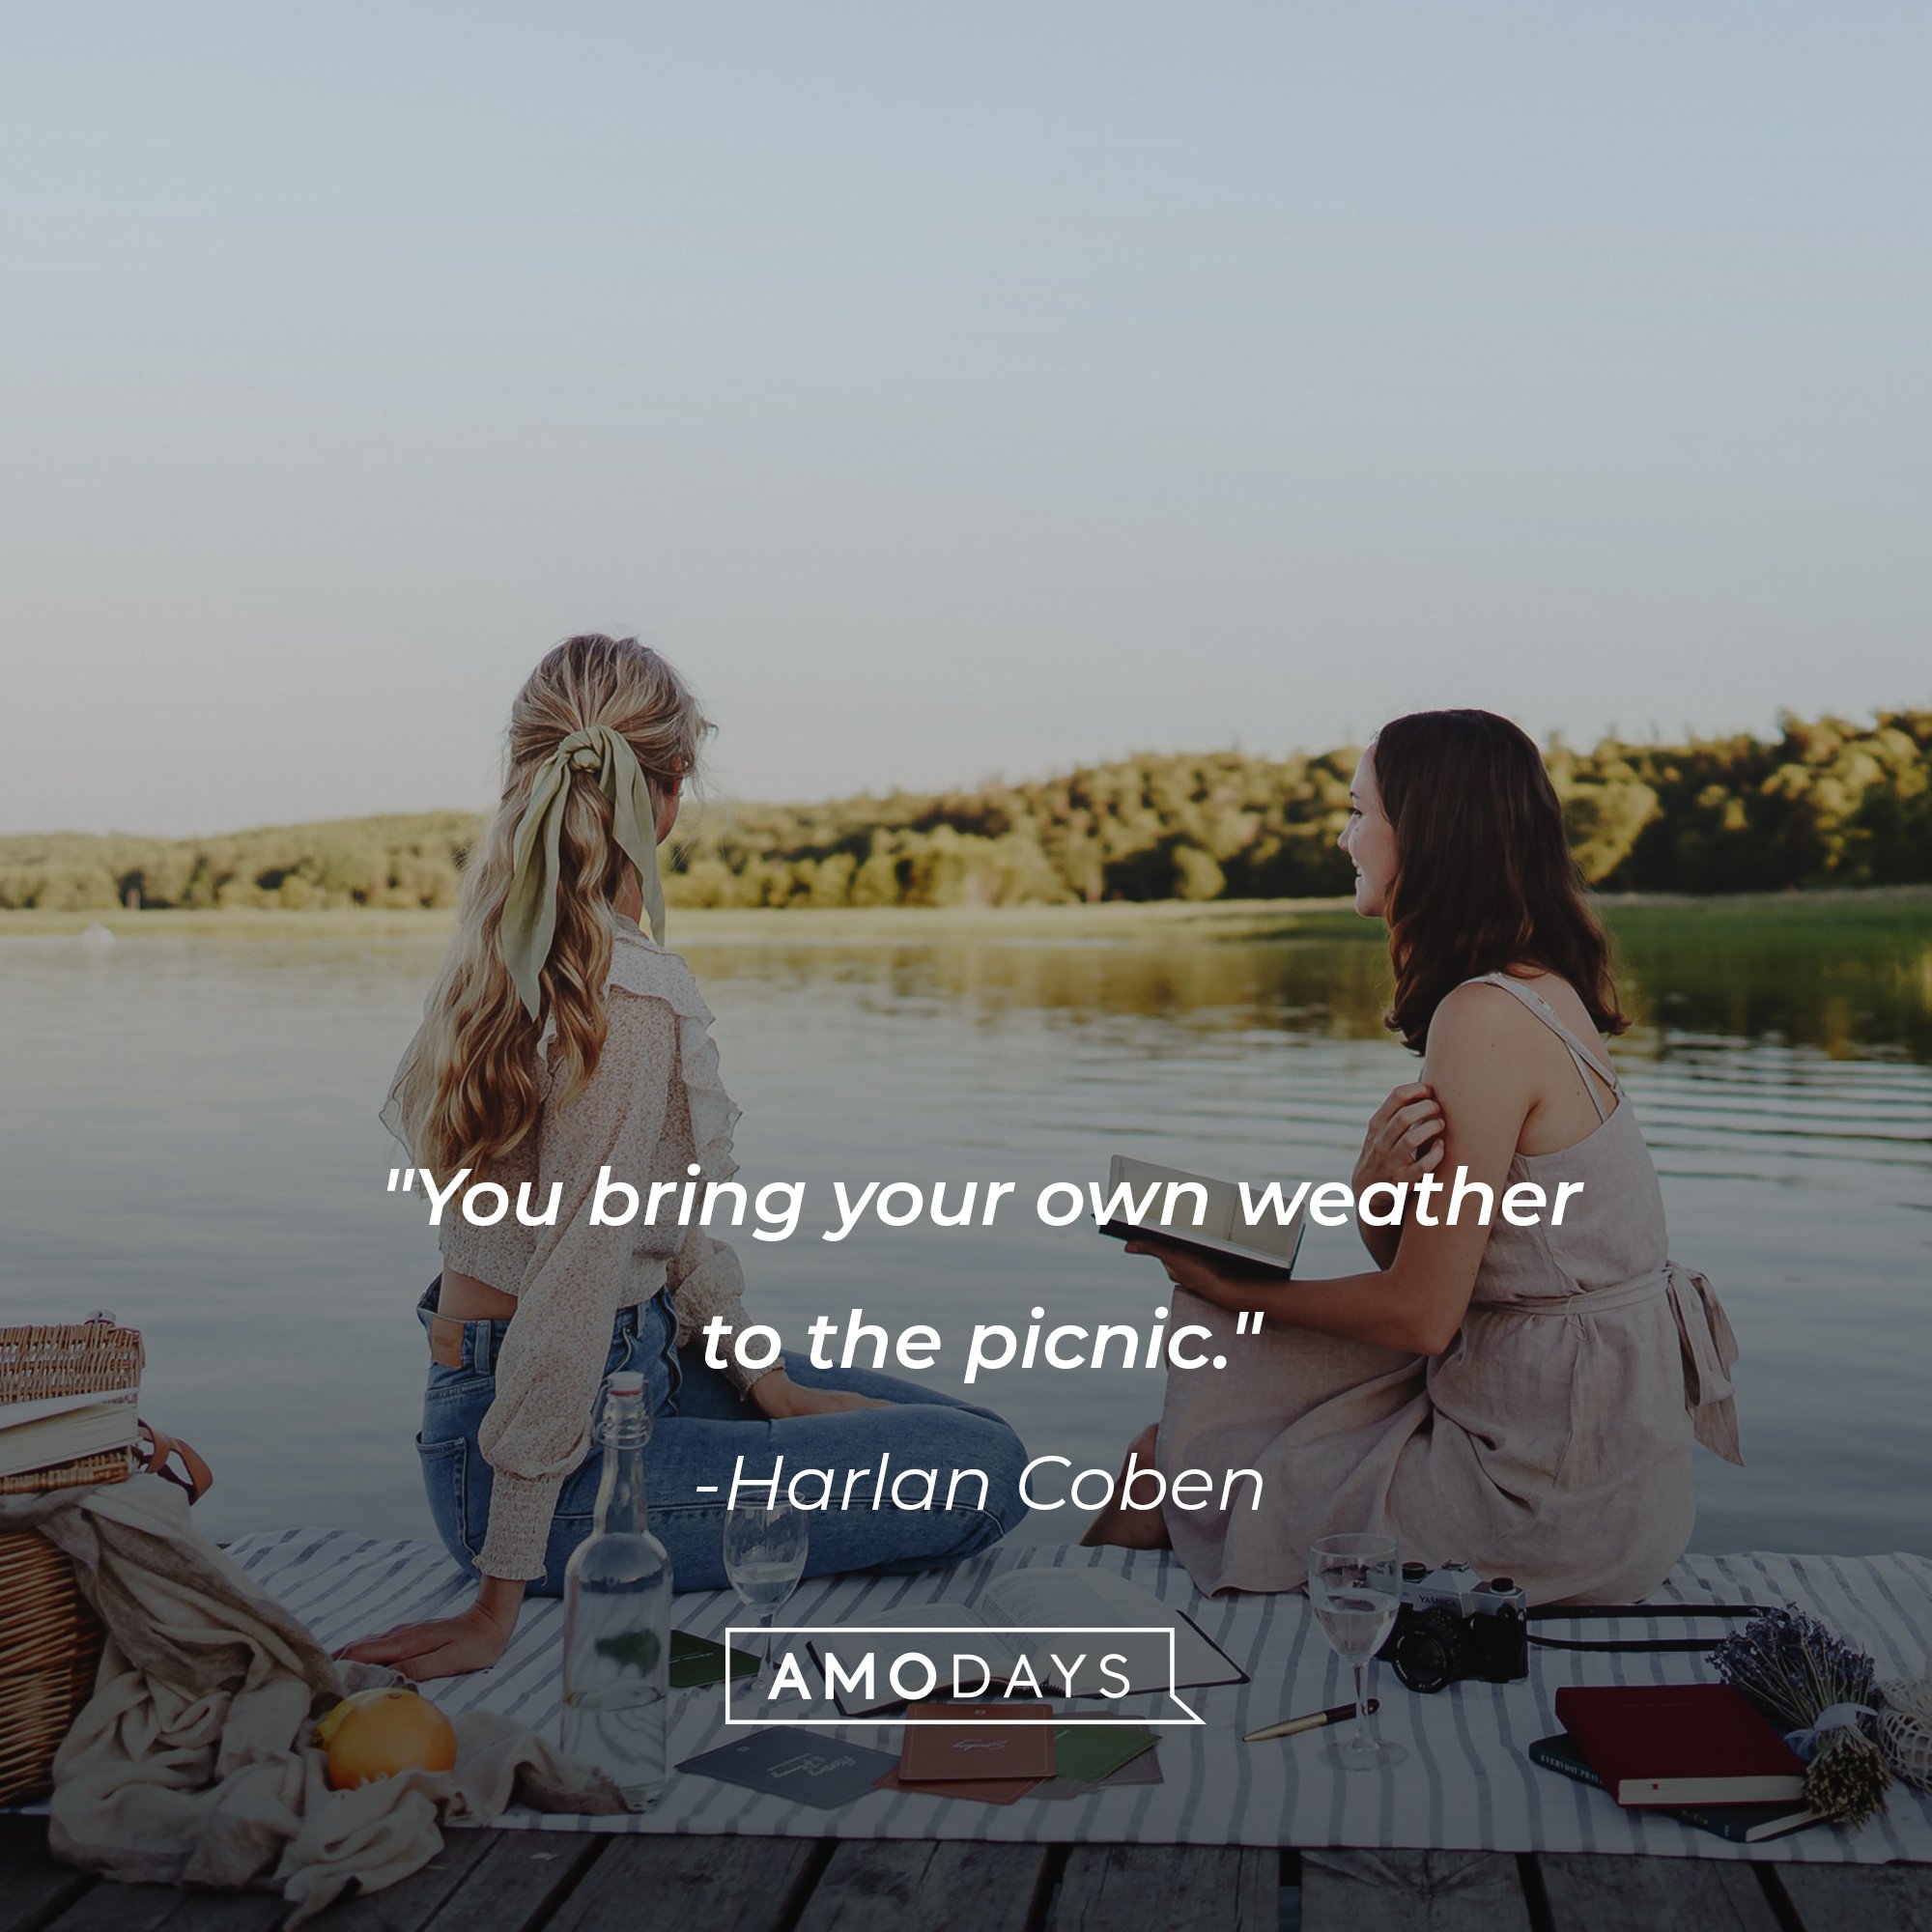 Harlan Coben's quote: "You bring your own weather to the picnic." | Image: AmoDays